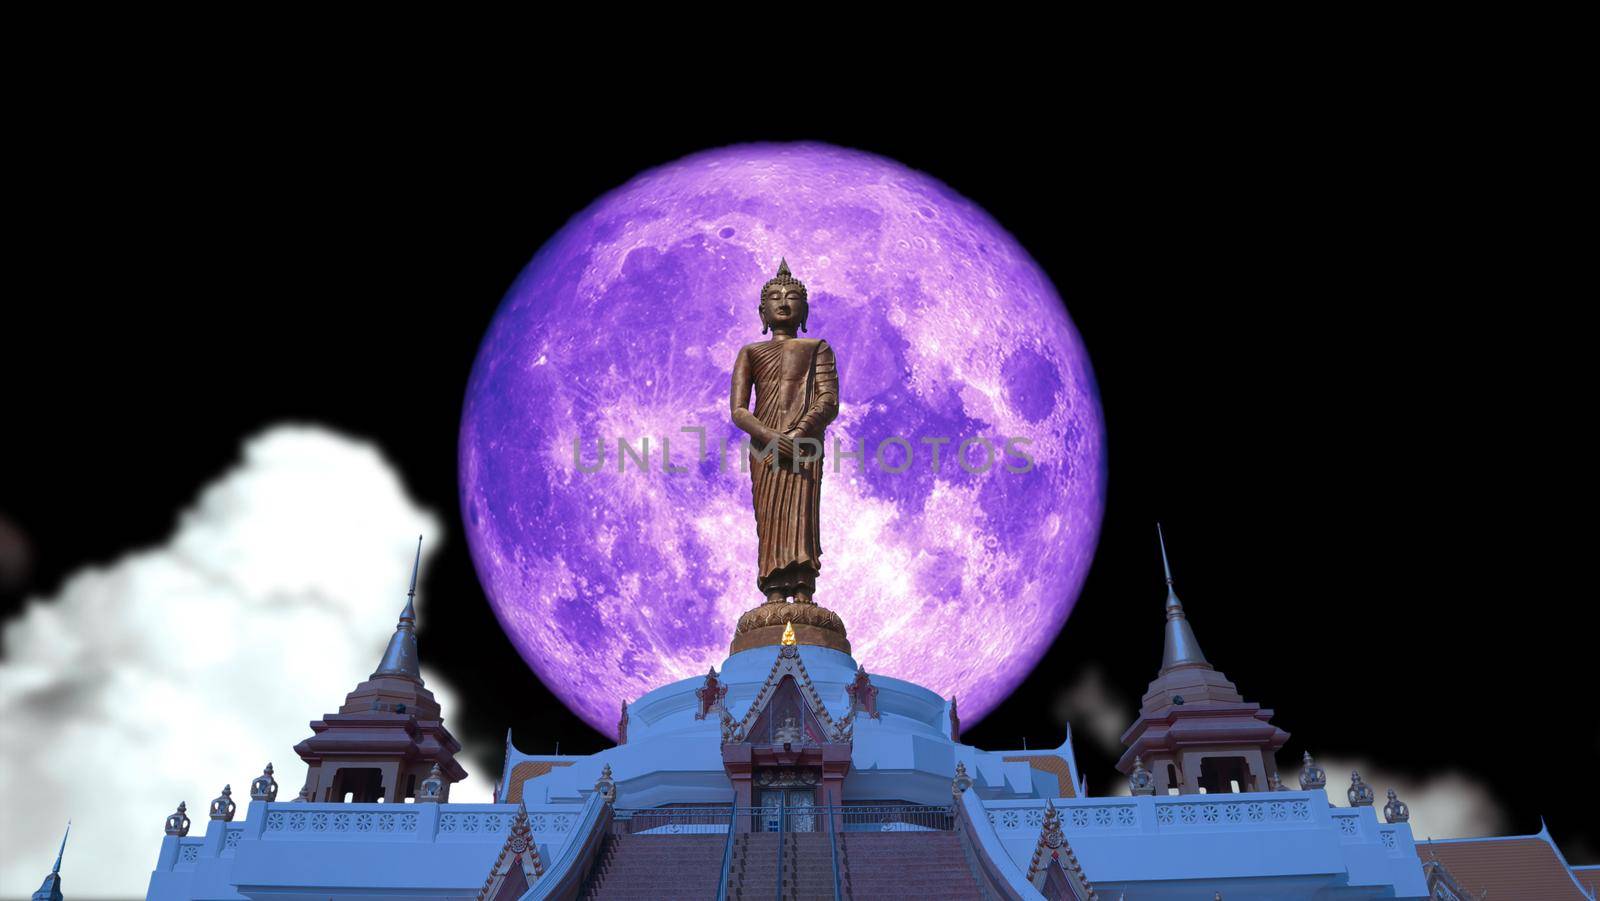 super full pink moon and Buddha looking seven day style on the night sky by Darkfox